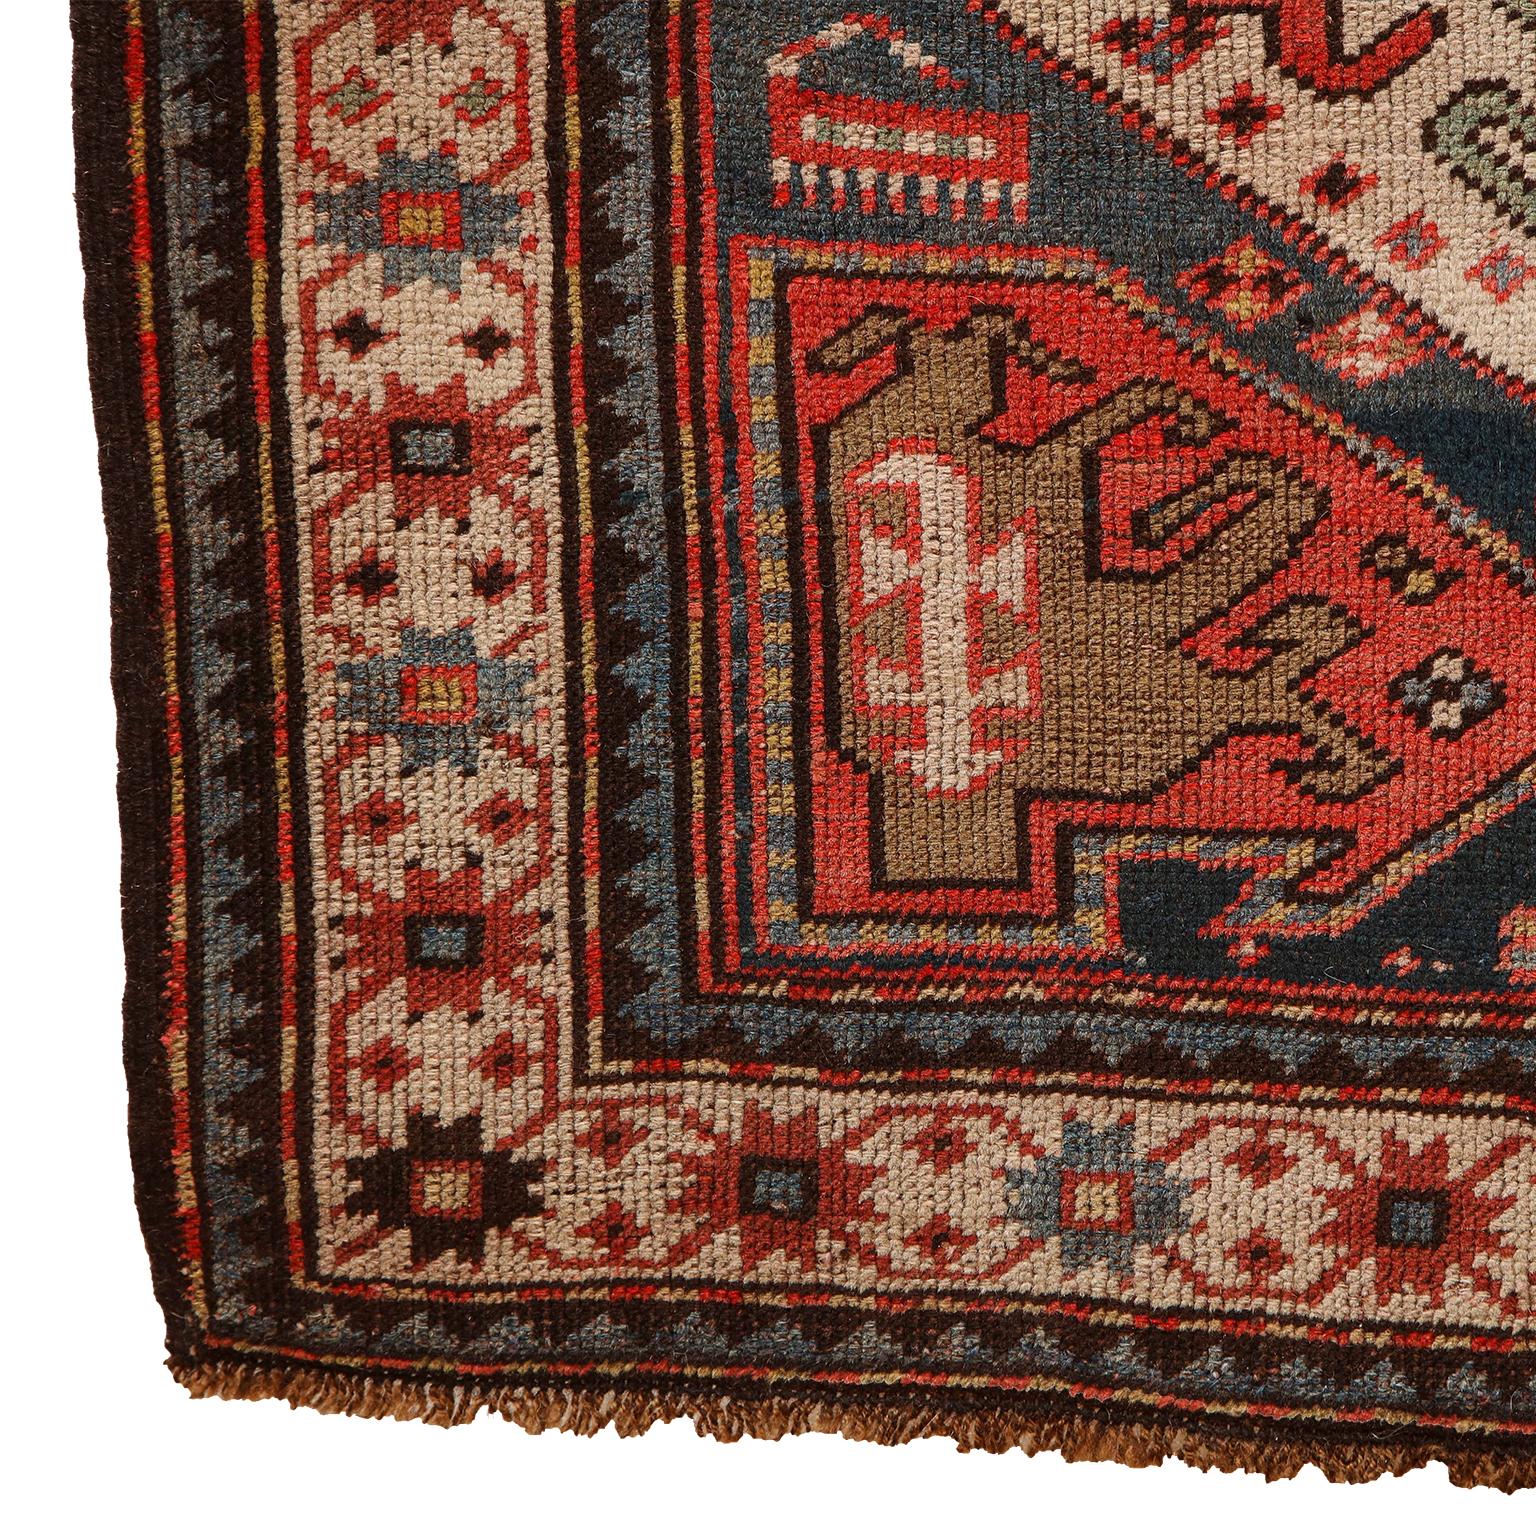 Antique 1880s Caucasian Rug, Wool, Blue, Green, Red, 4' x 6' For Sale 6